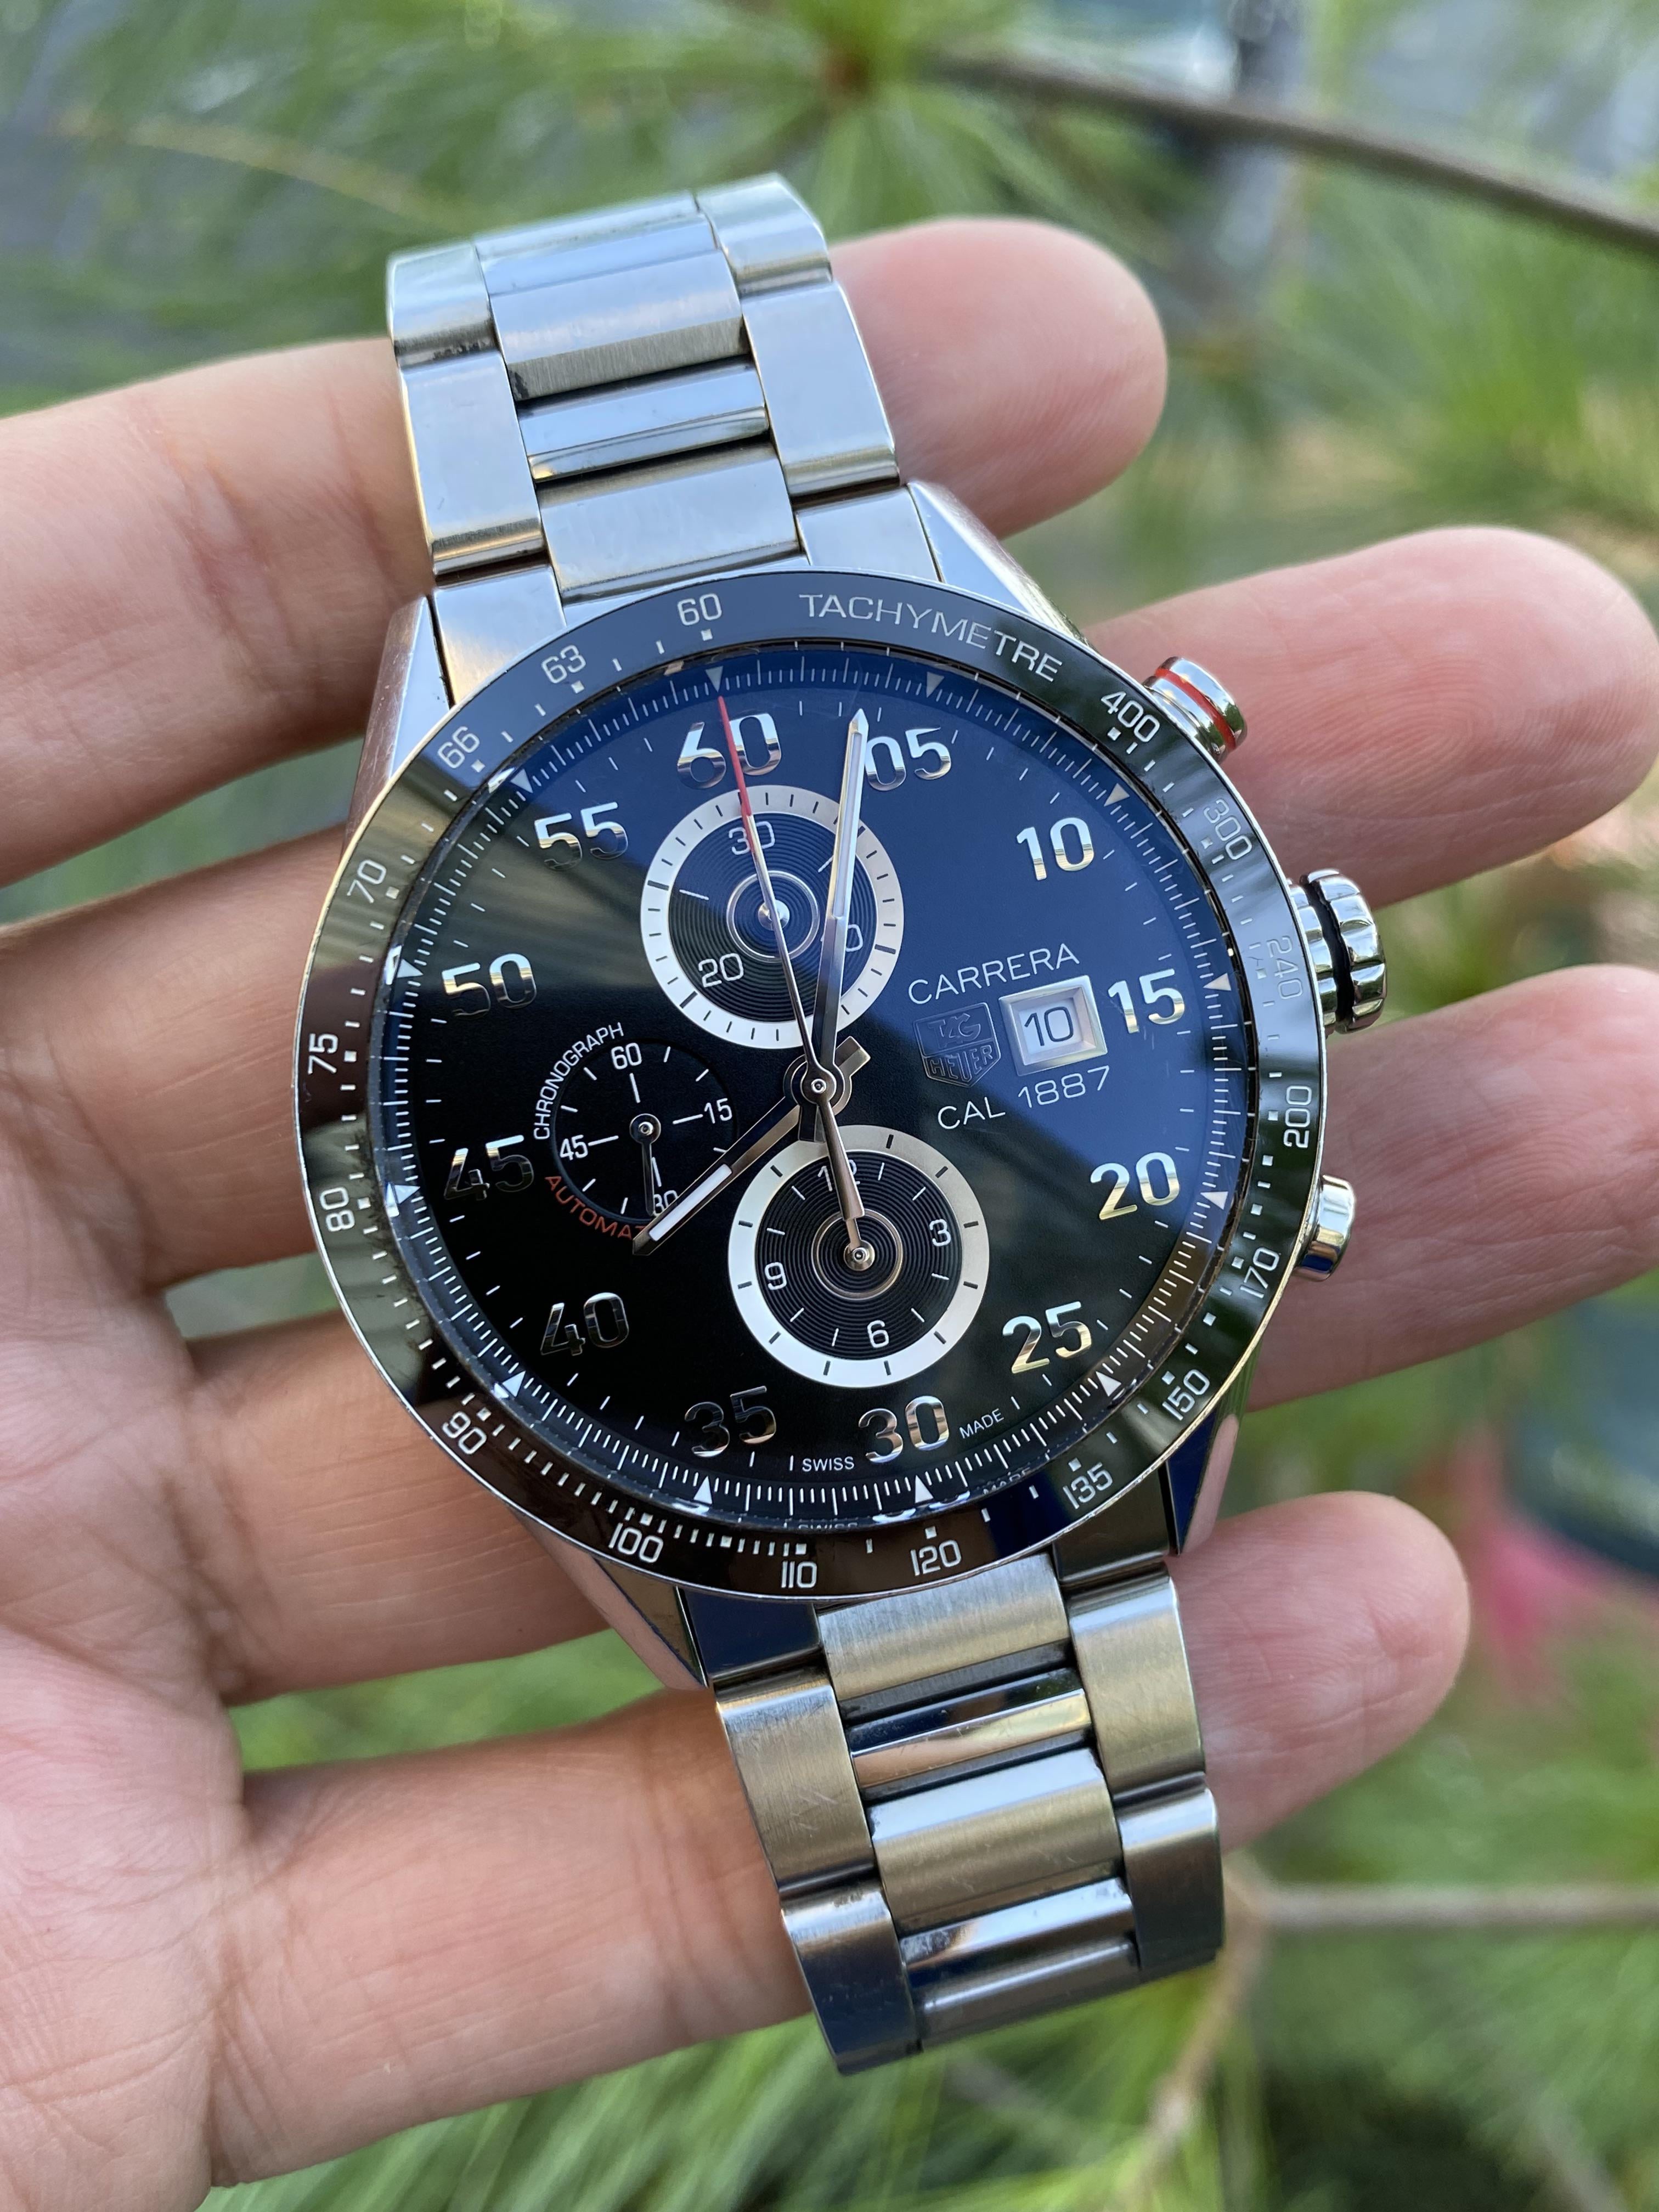 TAG Heuer Grand Carrera for $1,700 for sale from a Trusted Seller